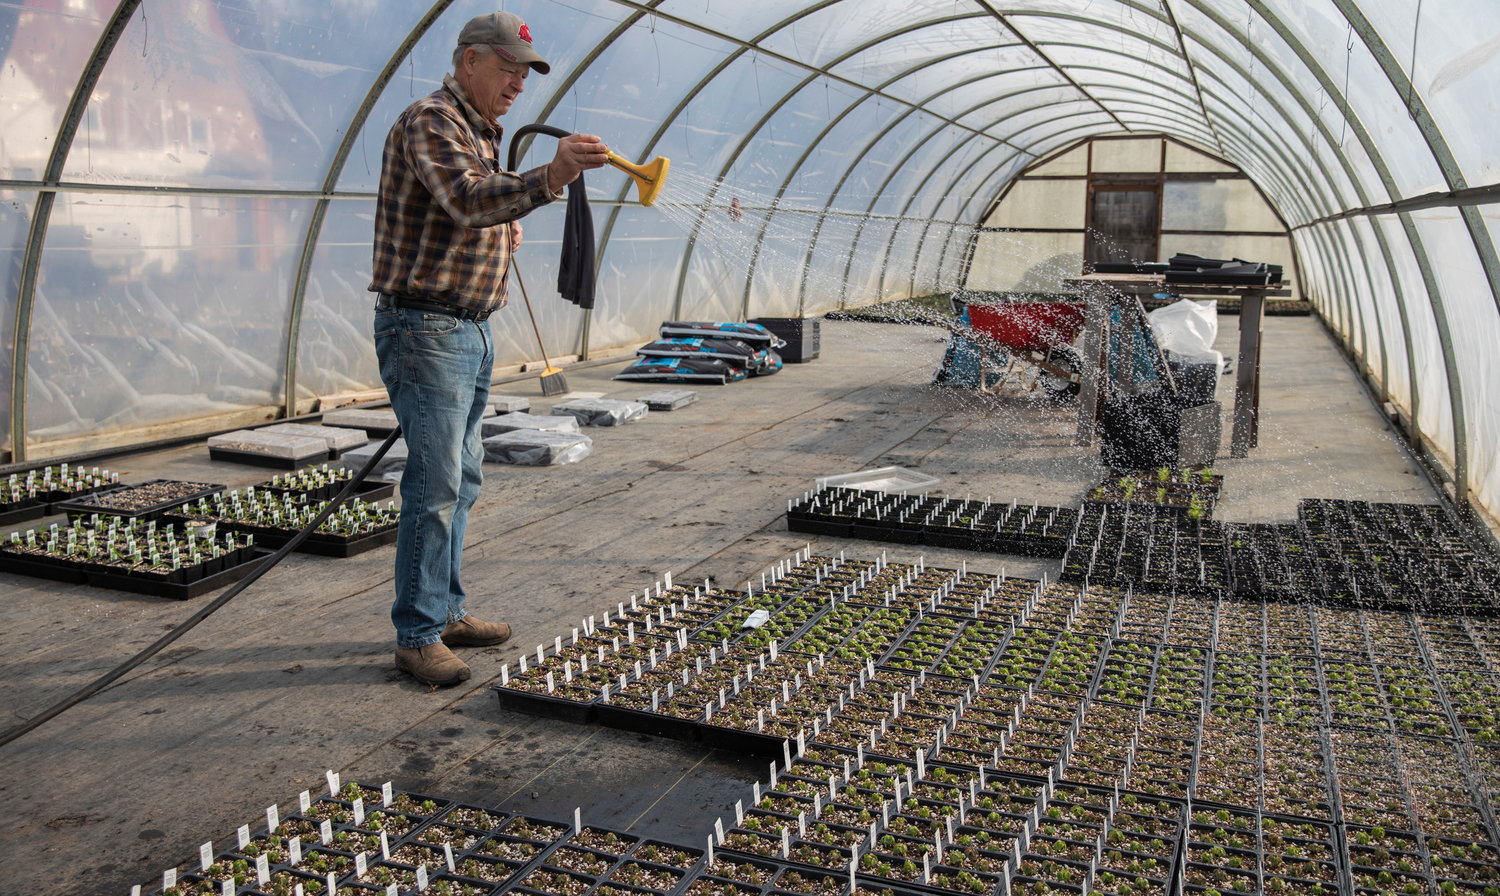 Spencer Davis continues to keep plants moist at the Dirty Thumb Nursery along state Route 6 near Adna on Wednesday.